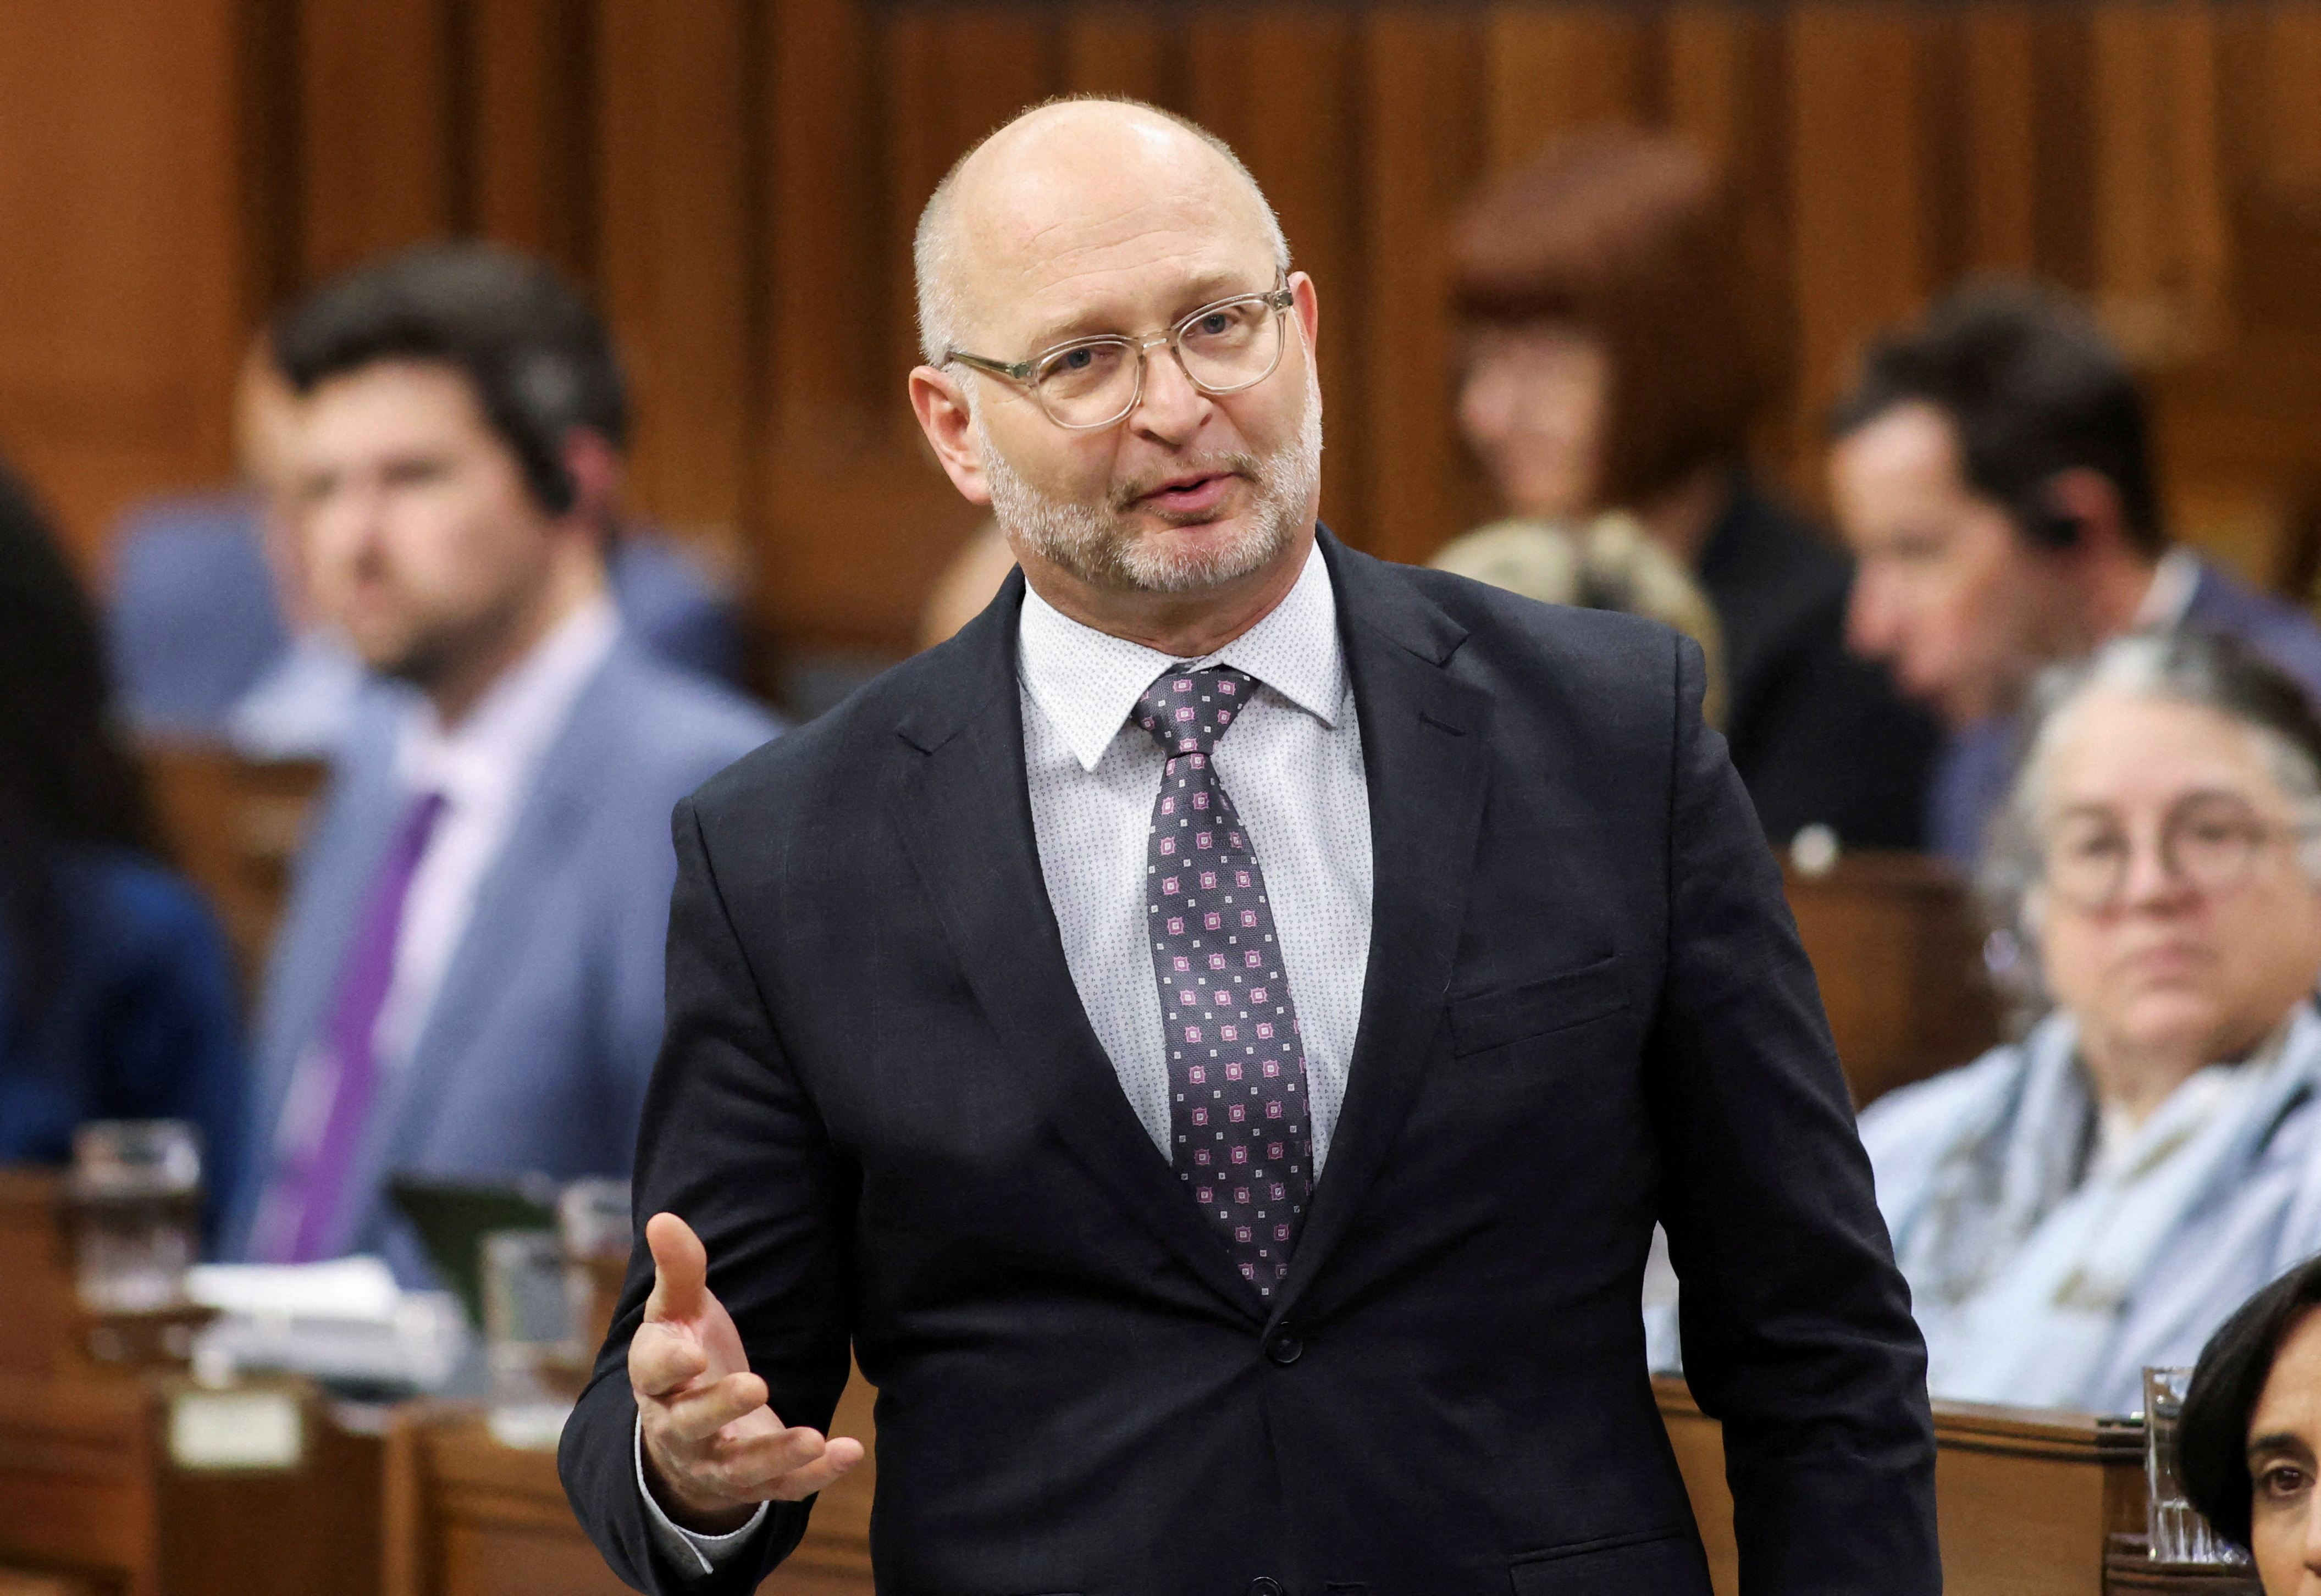 Canada's Minister of Justice and Attorney General Lametti speaks in parliament during Question Period in Ottawa